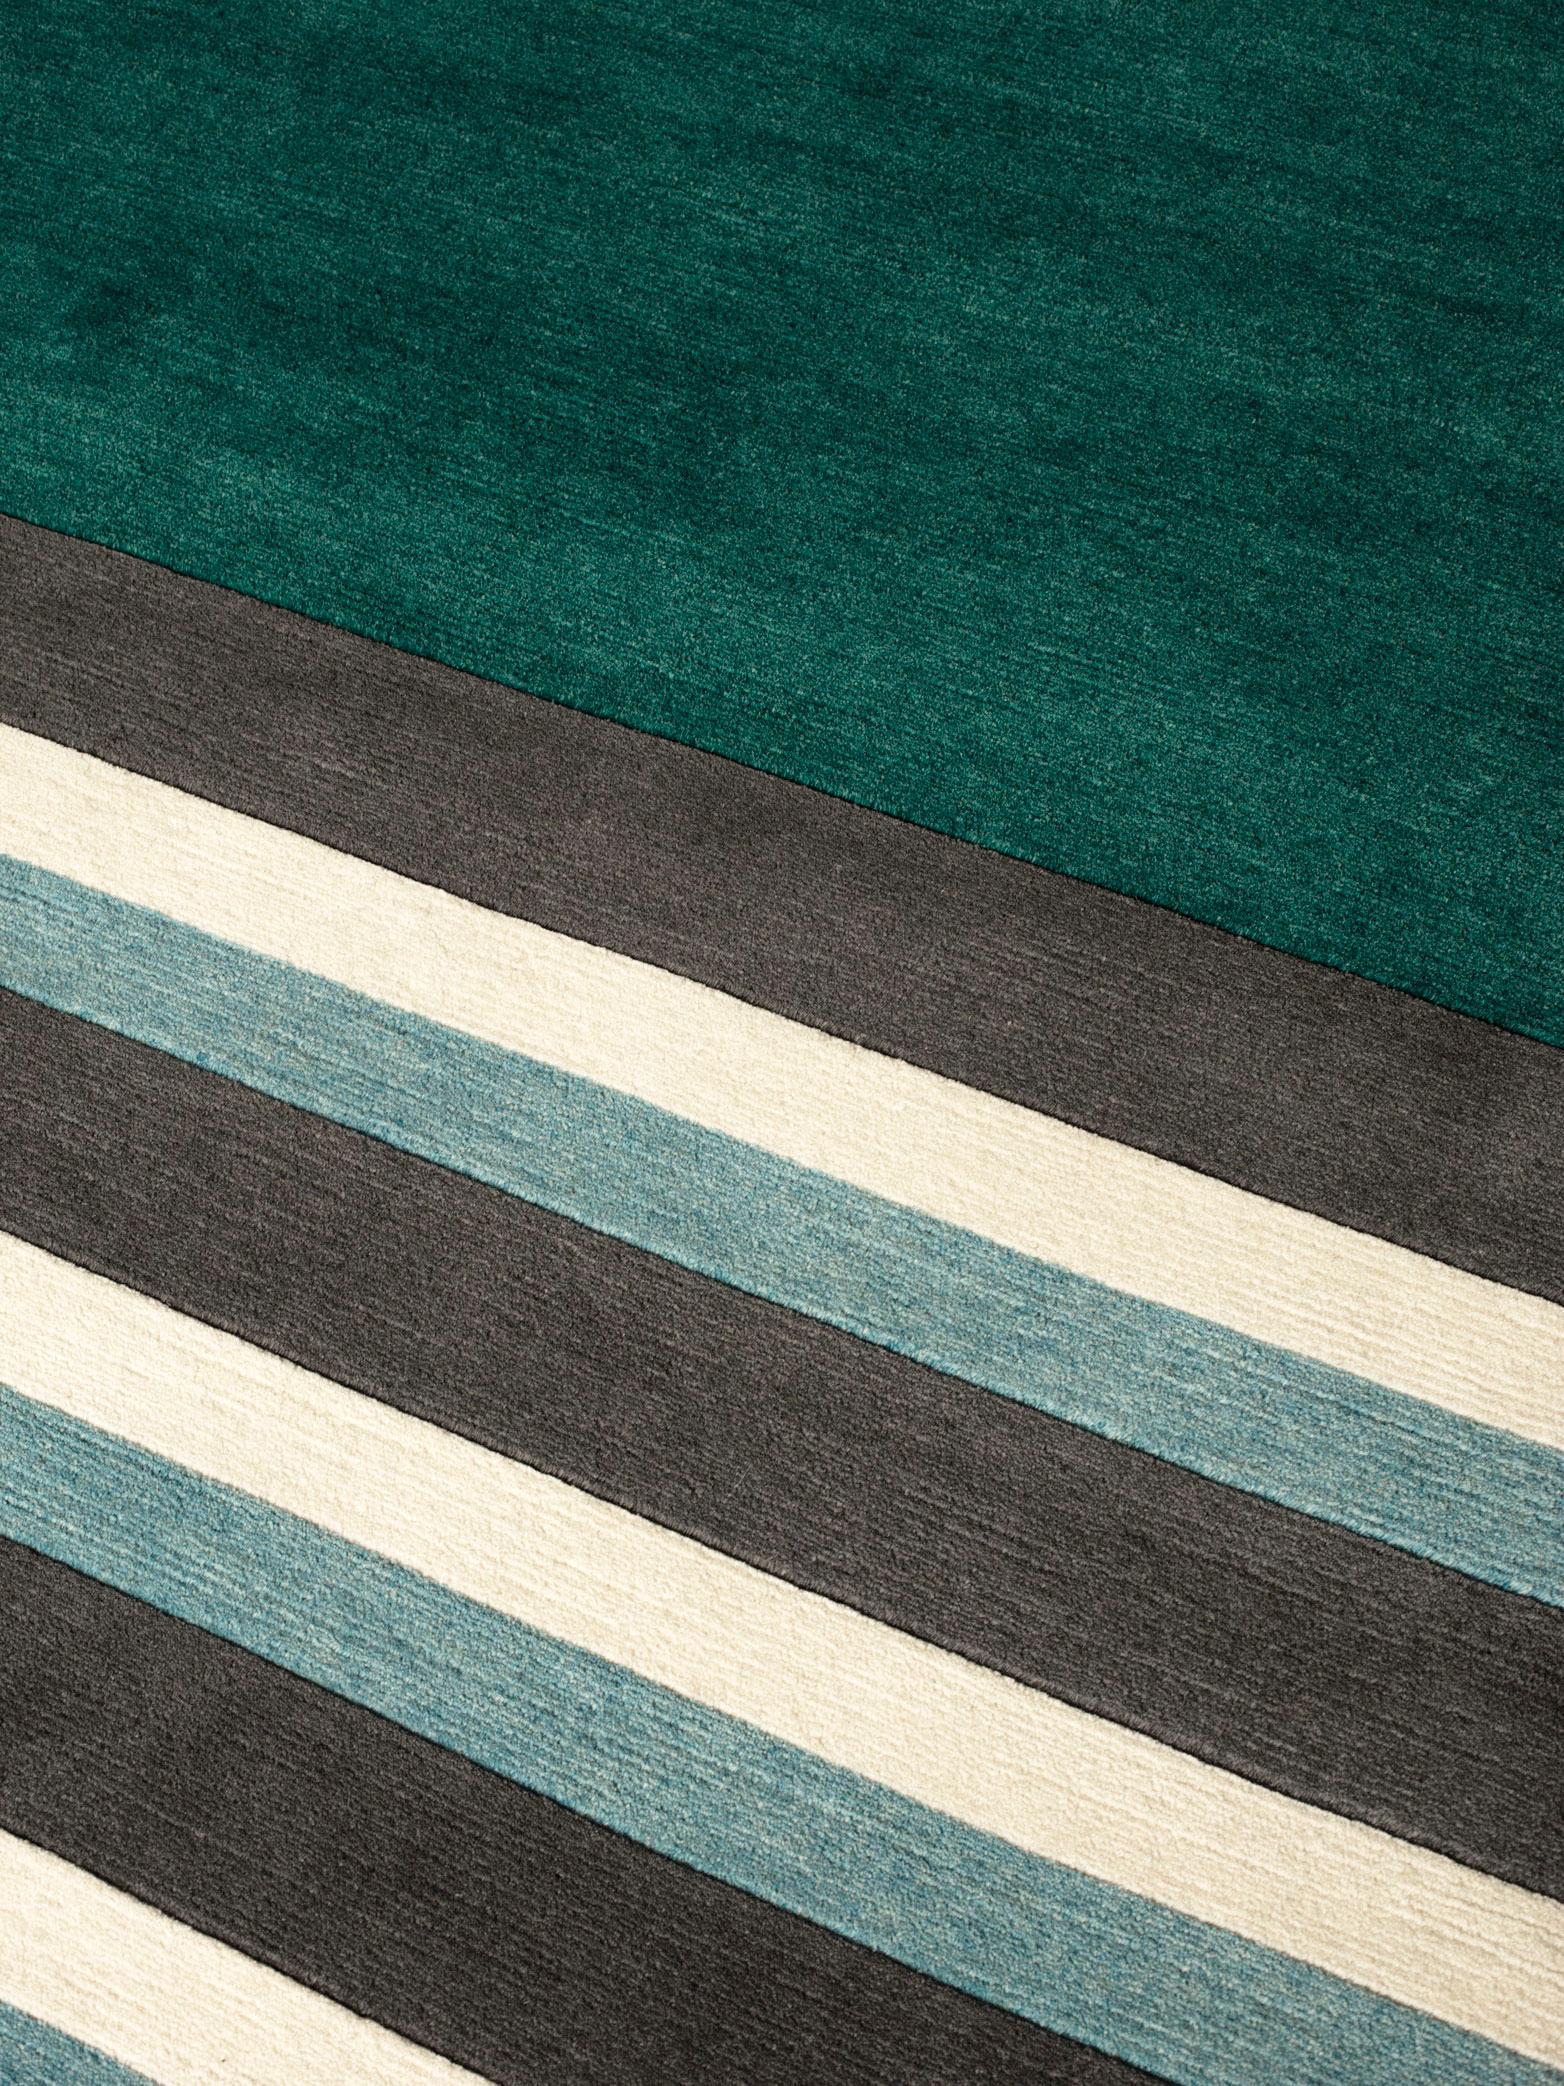 cc-tapis Blue Blanc Gris Les Arcs Collection by Charlotte Perriand - IN STOCK In New Condition For Sale In Brooklyn, NY